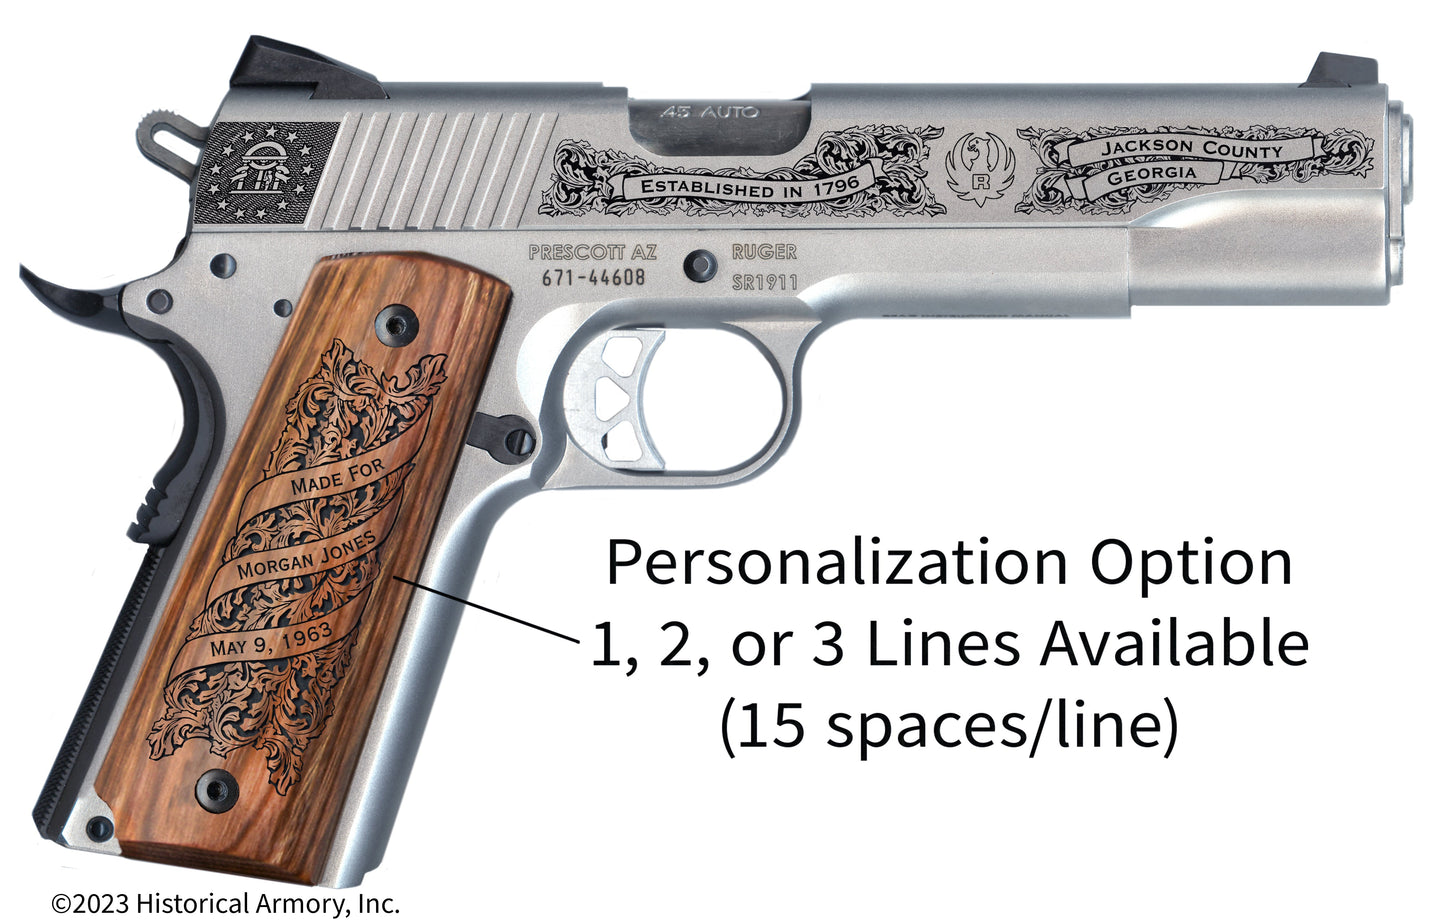 Jackson County Georgia Personalized Engraved .45 Auto Ruger 1911